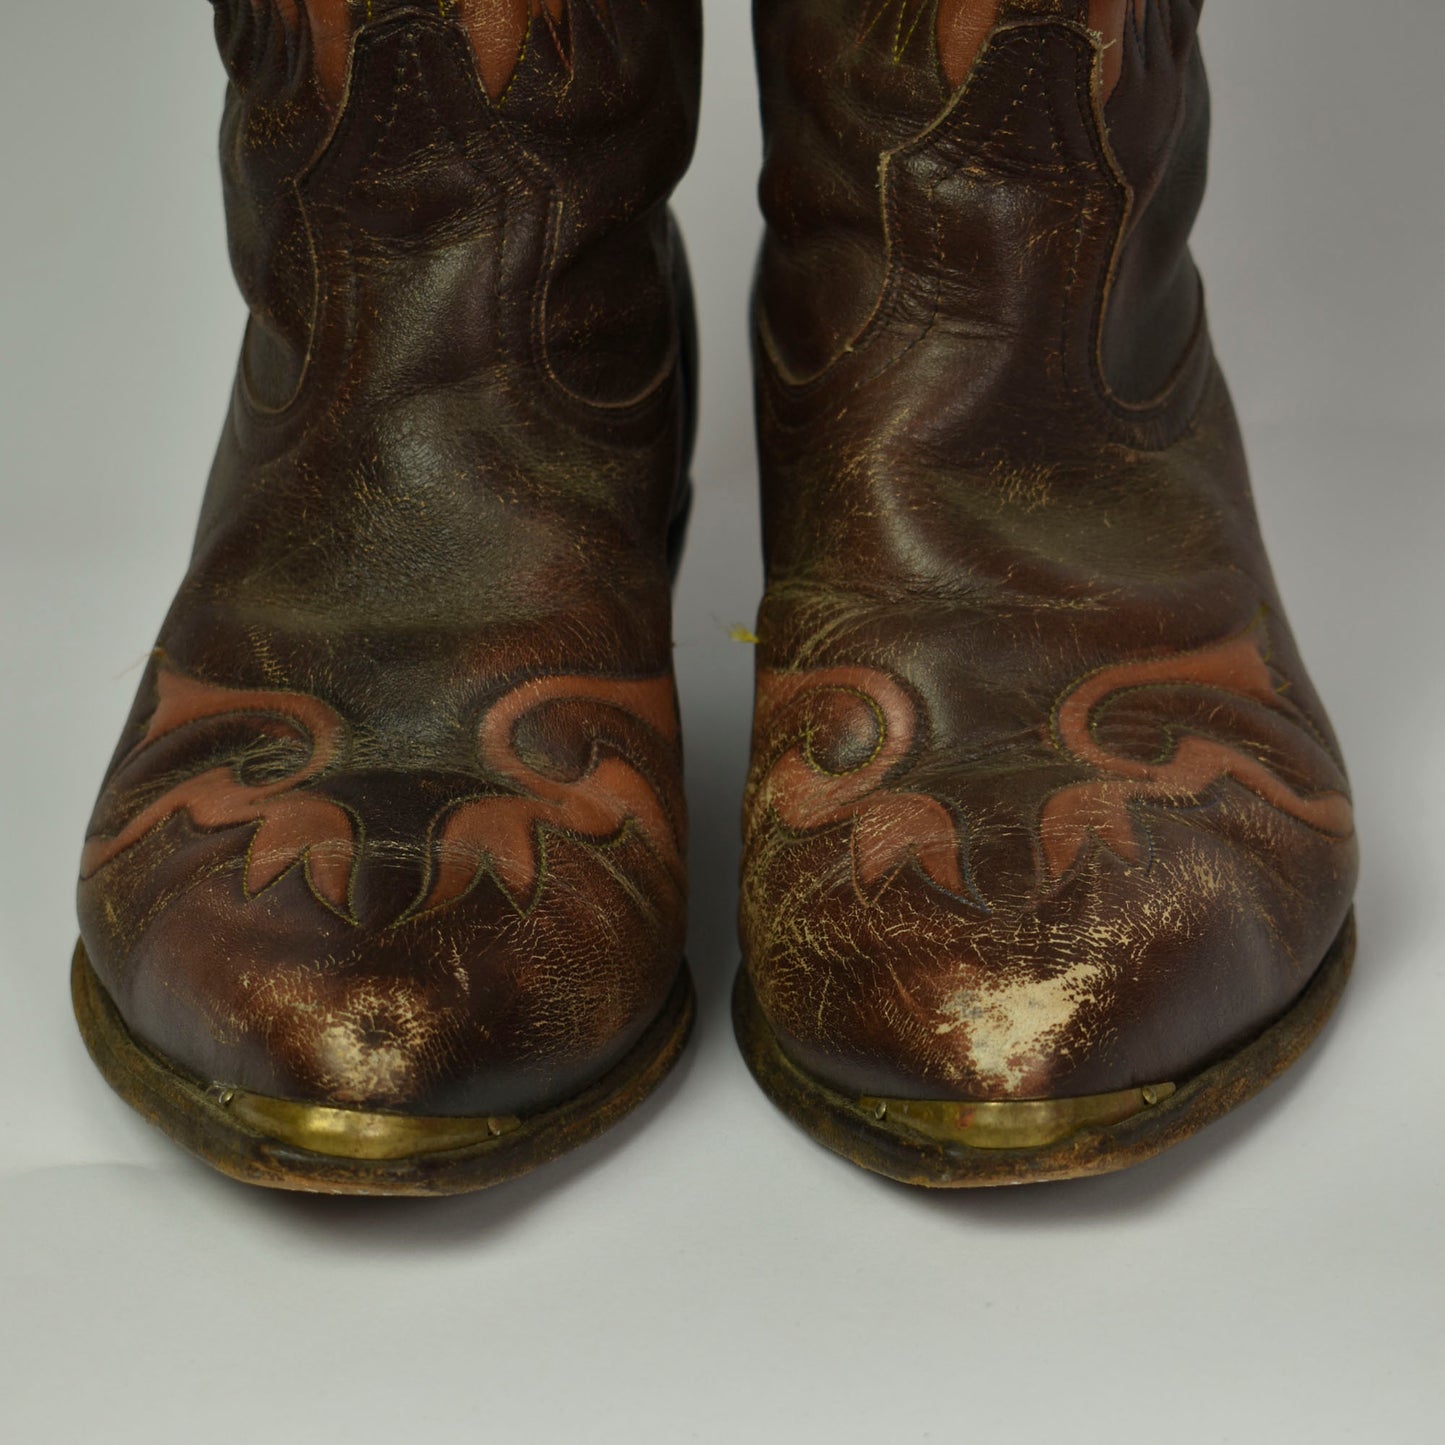 Vintage 80s Boulet Leather Western Cowboy Indian Rockabilly Size 7 Boots